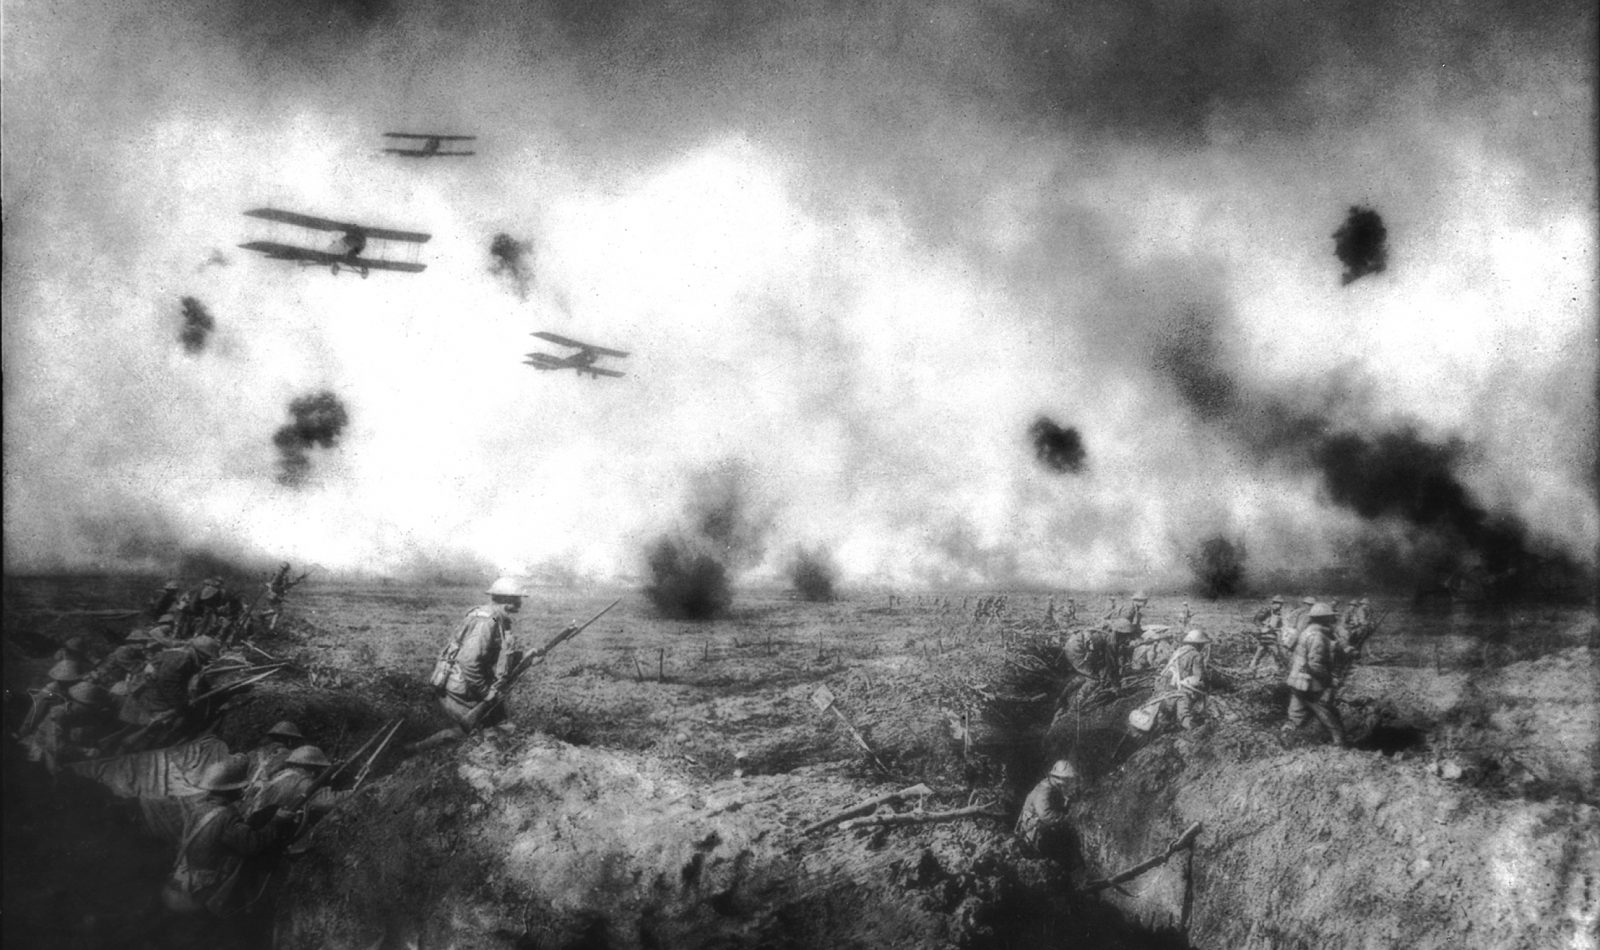 A black and white image of land and air fighting on the Western Front